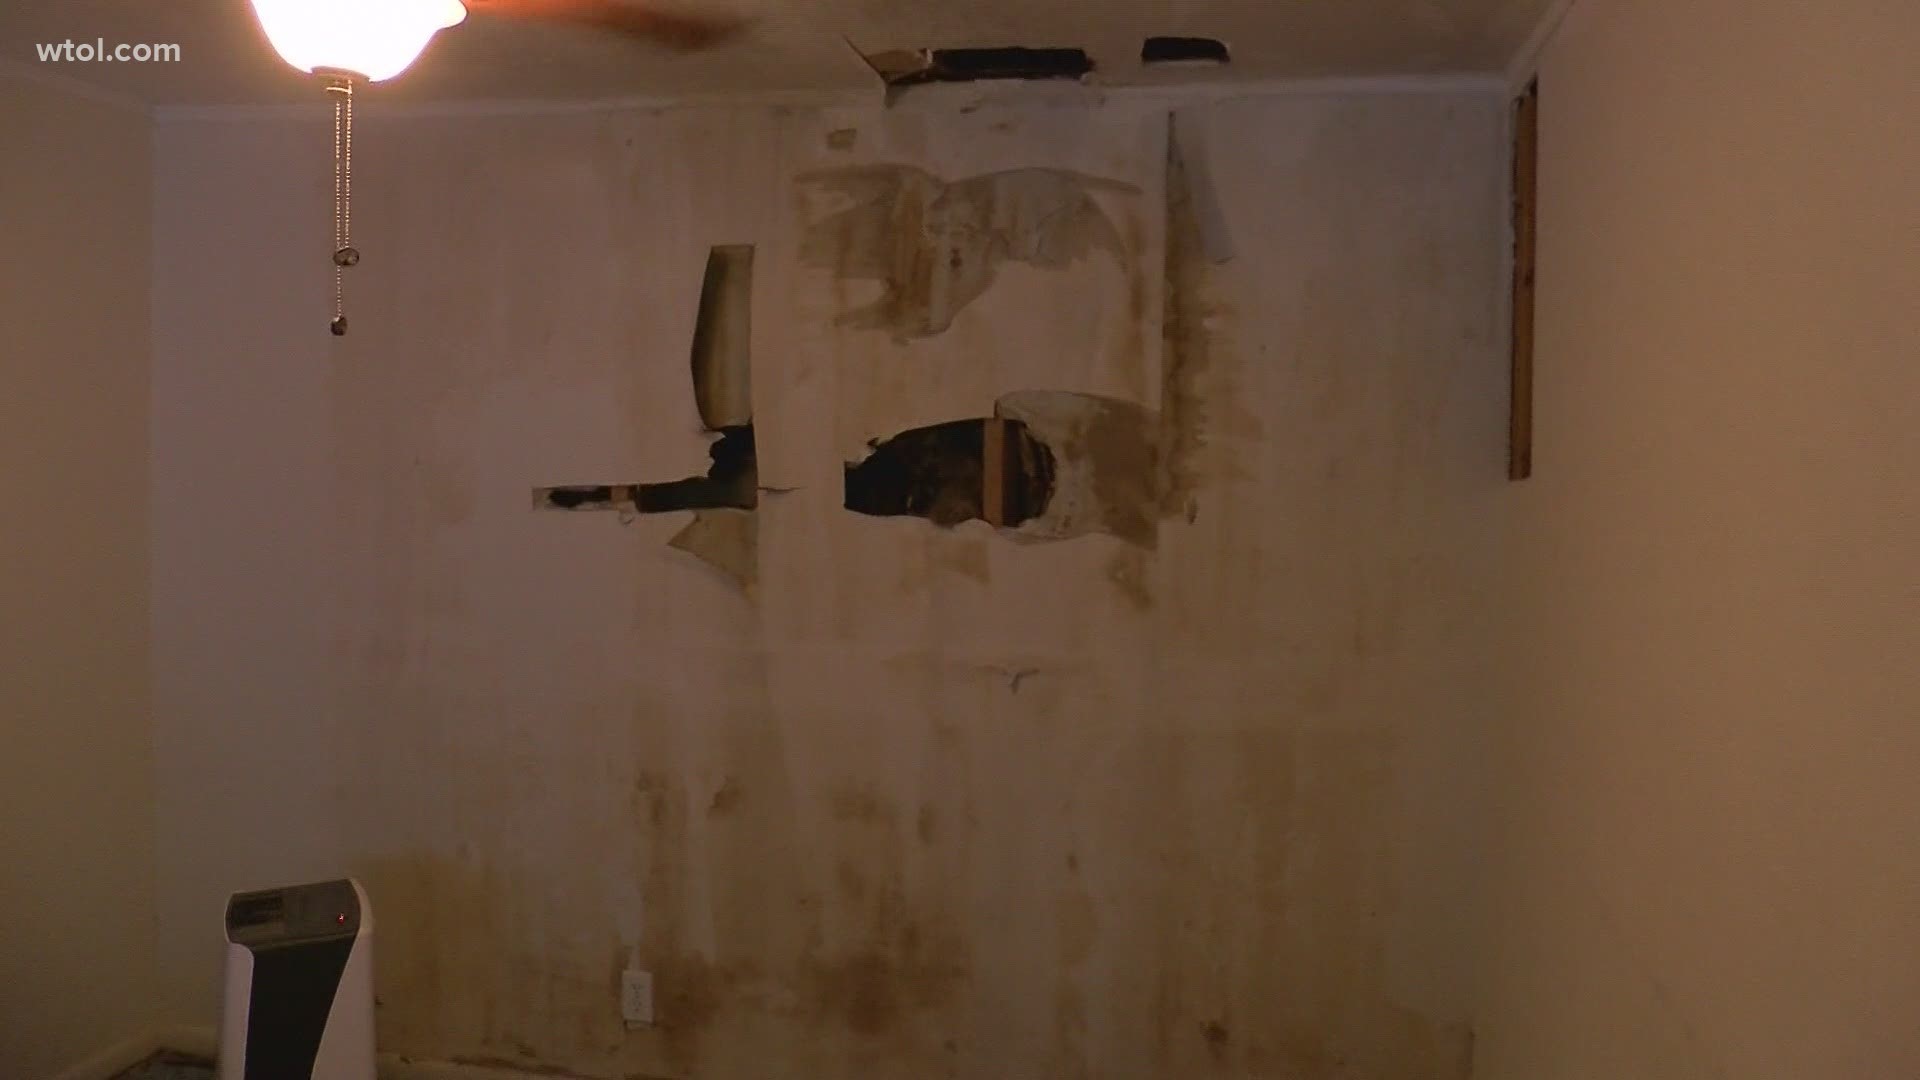 Many residents are fed up with the constant need for repairs.